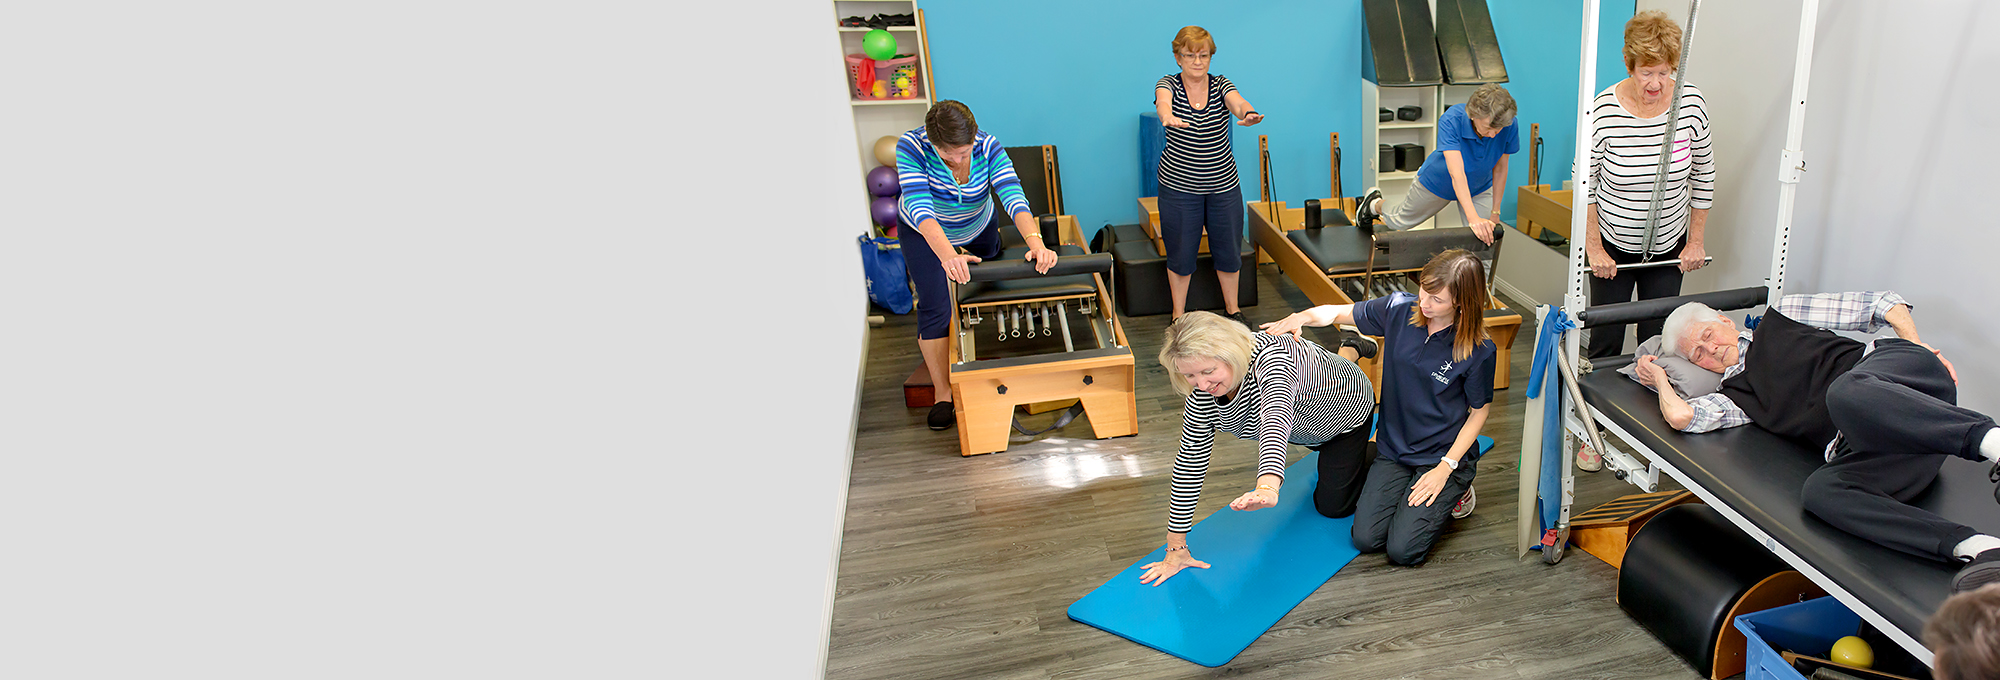 mature aged physiotherapy exercise classes